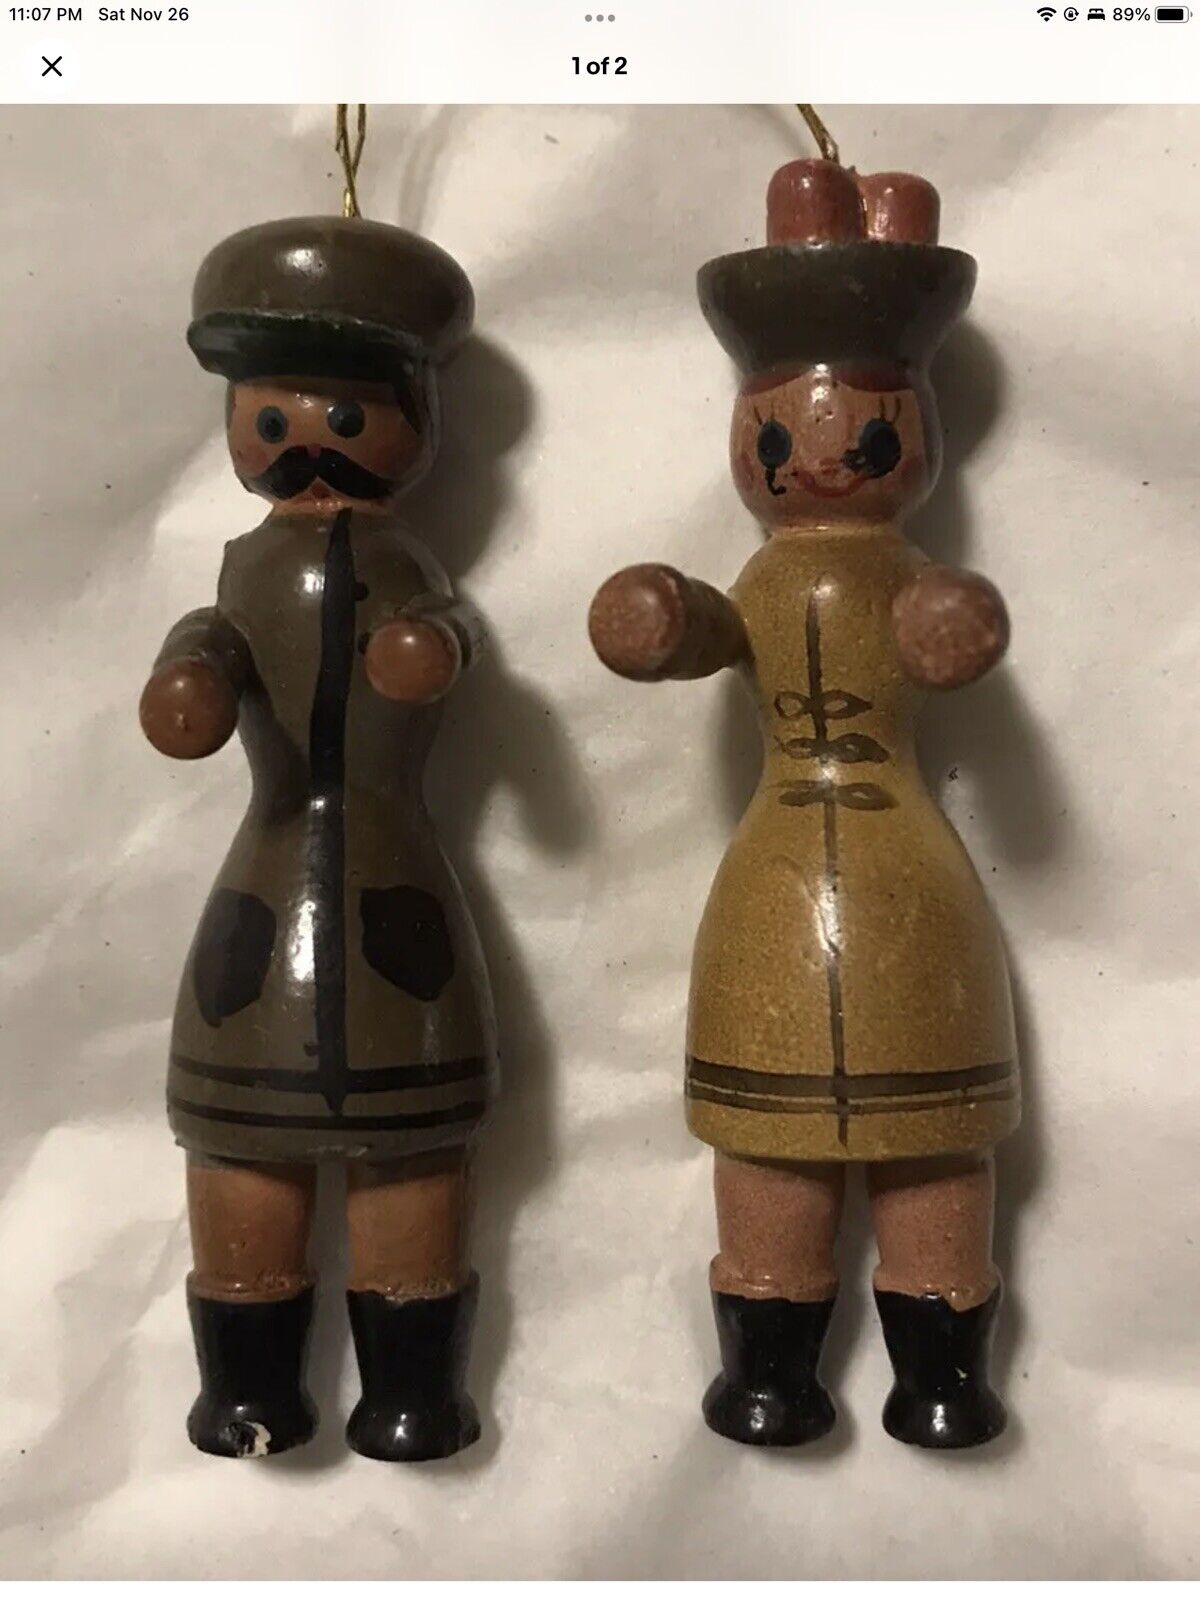 Lot of 2 Vintage Painted Wooden Christmas Ornaments Man/Woman Couple